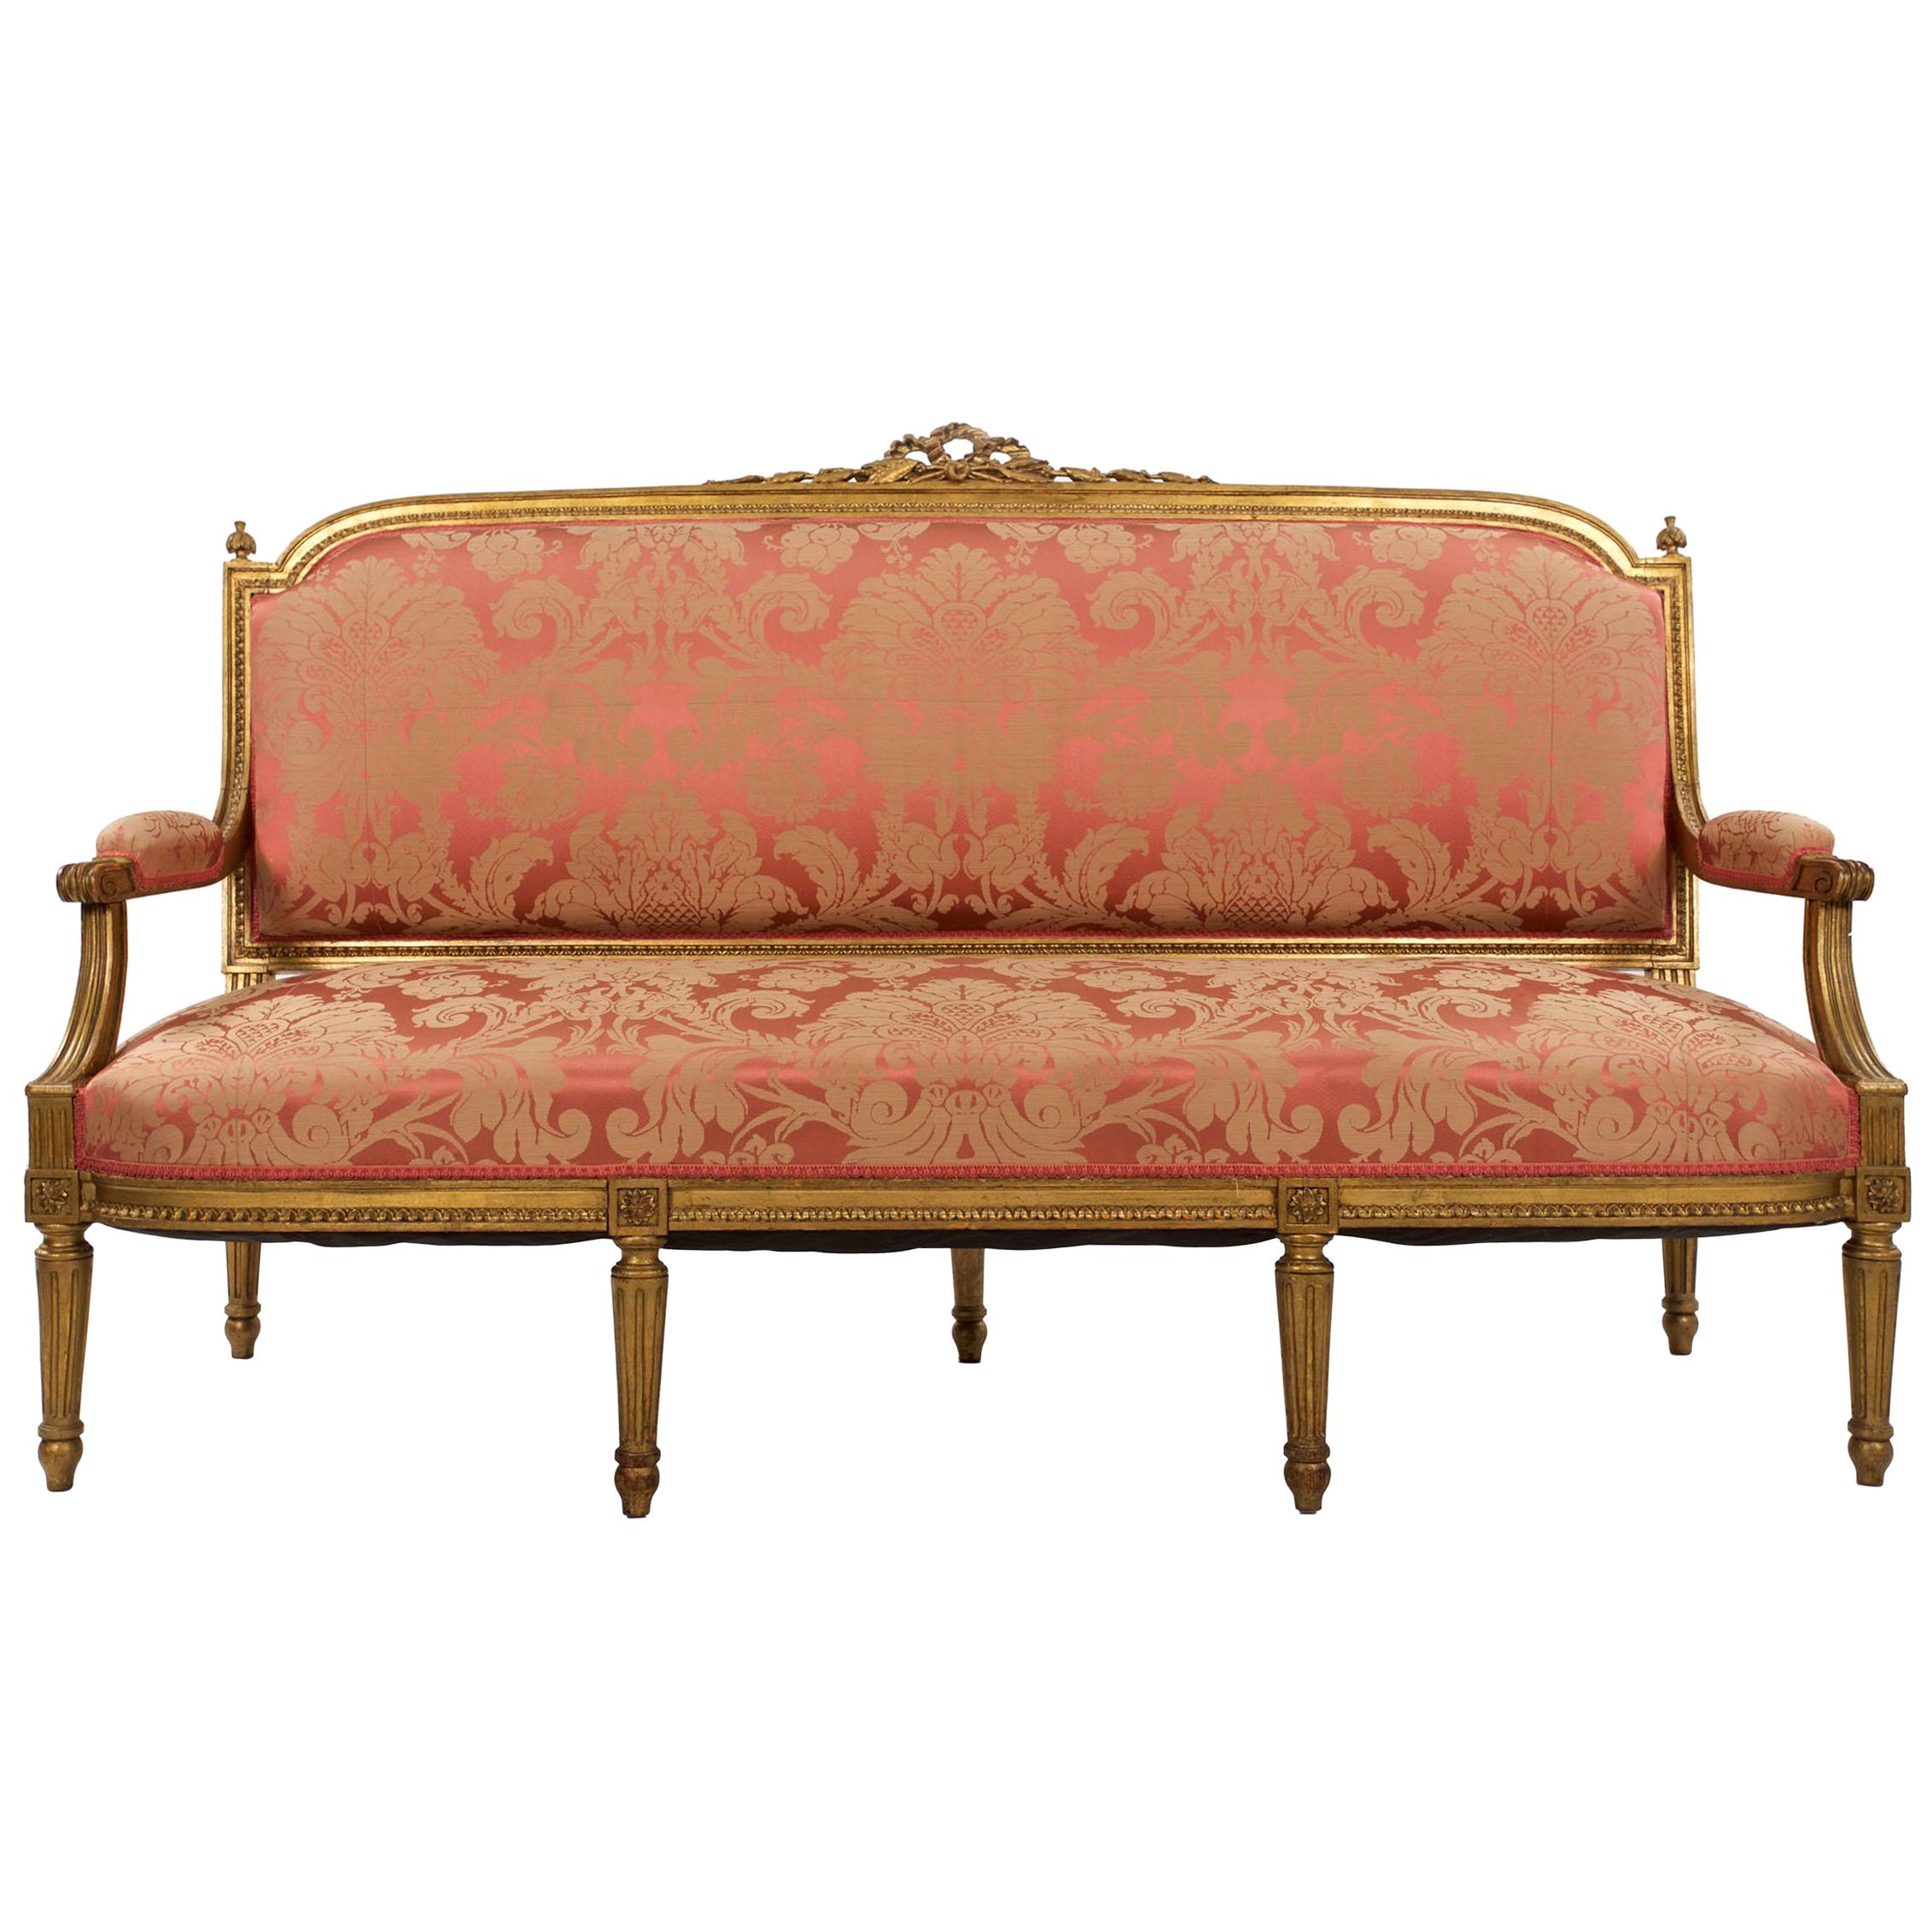 French Louis XVI Style Carved Giltwood Antique Settee Sofa